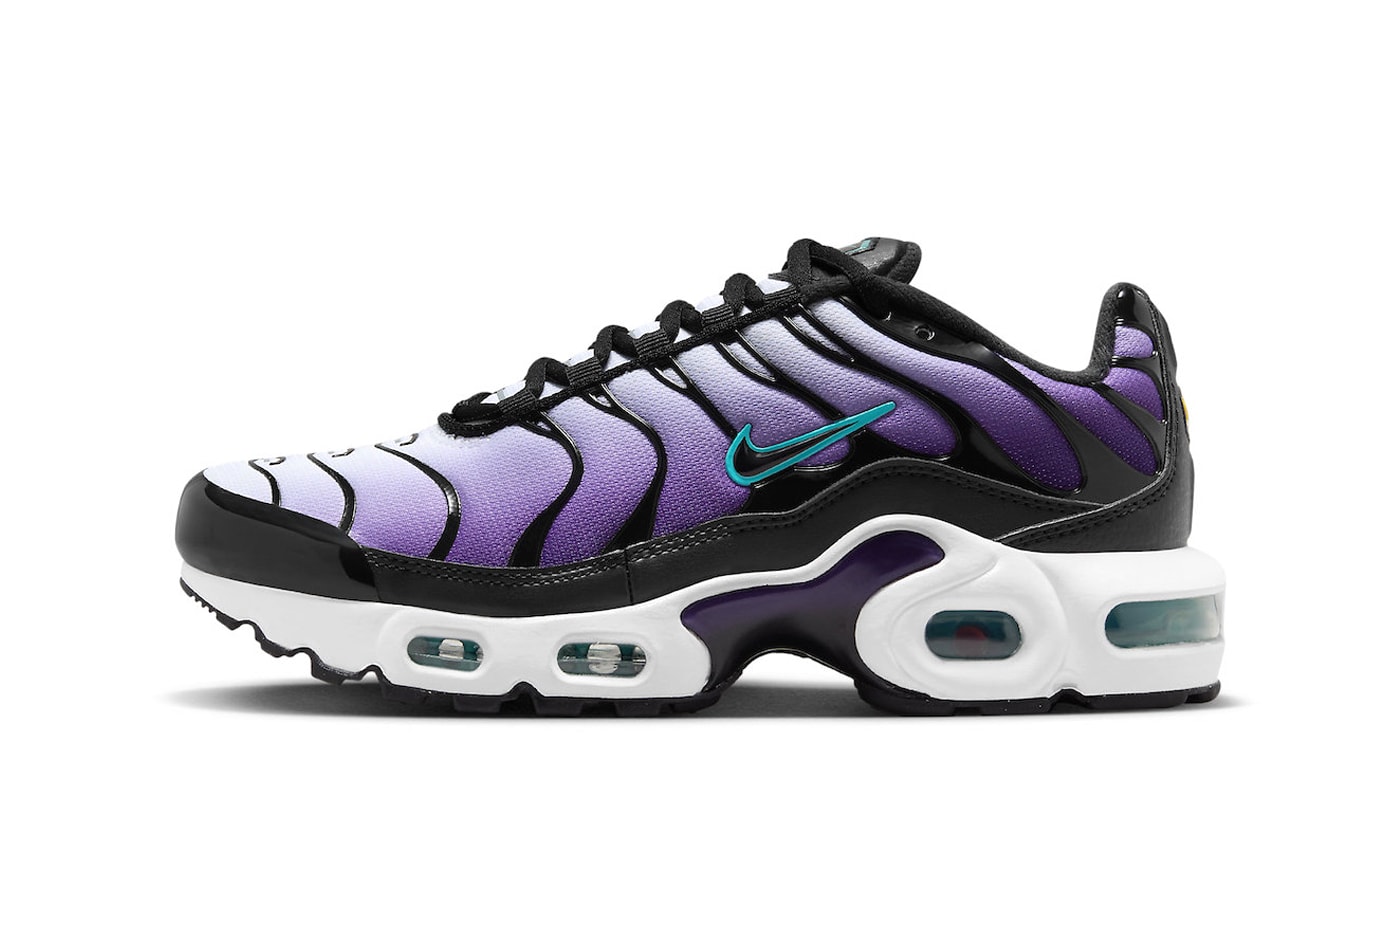 Nike Air Max Plus Gets Dressed in "Reverse Grape" FQ2415-500 purple technical sneaker athletic comfortable swoosh